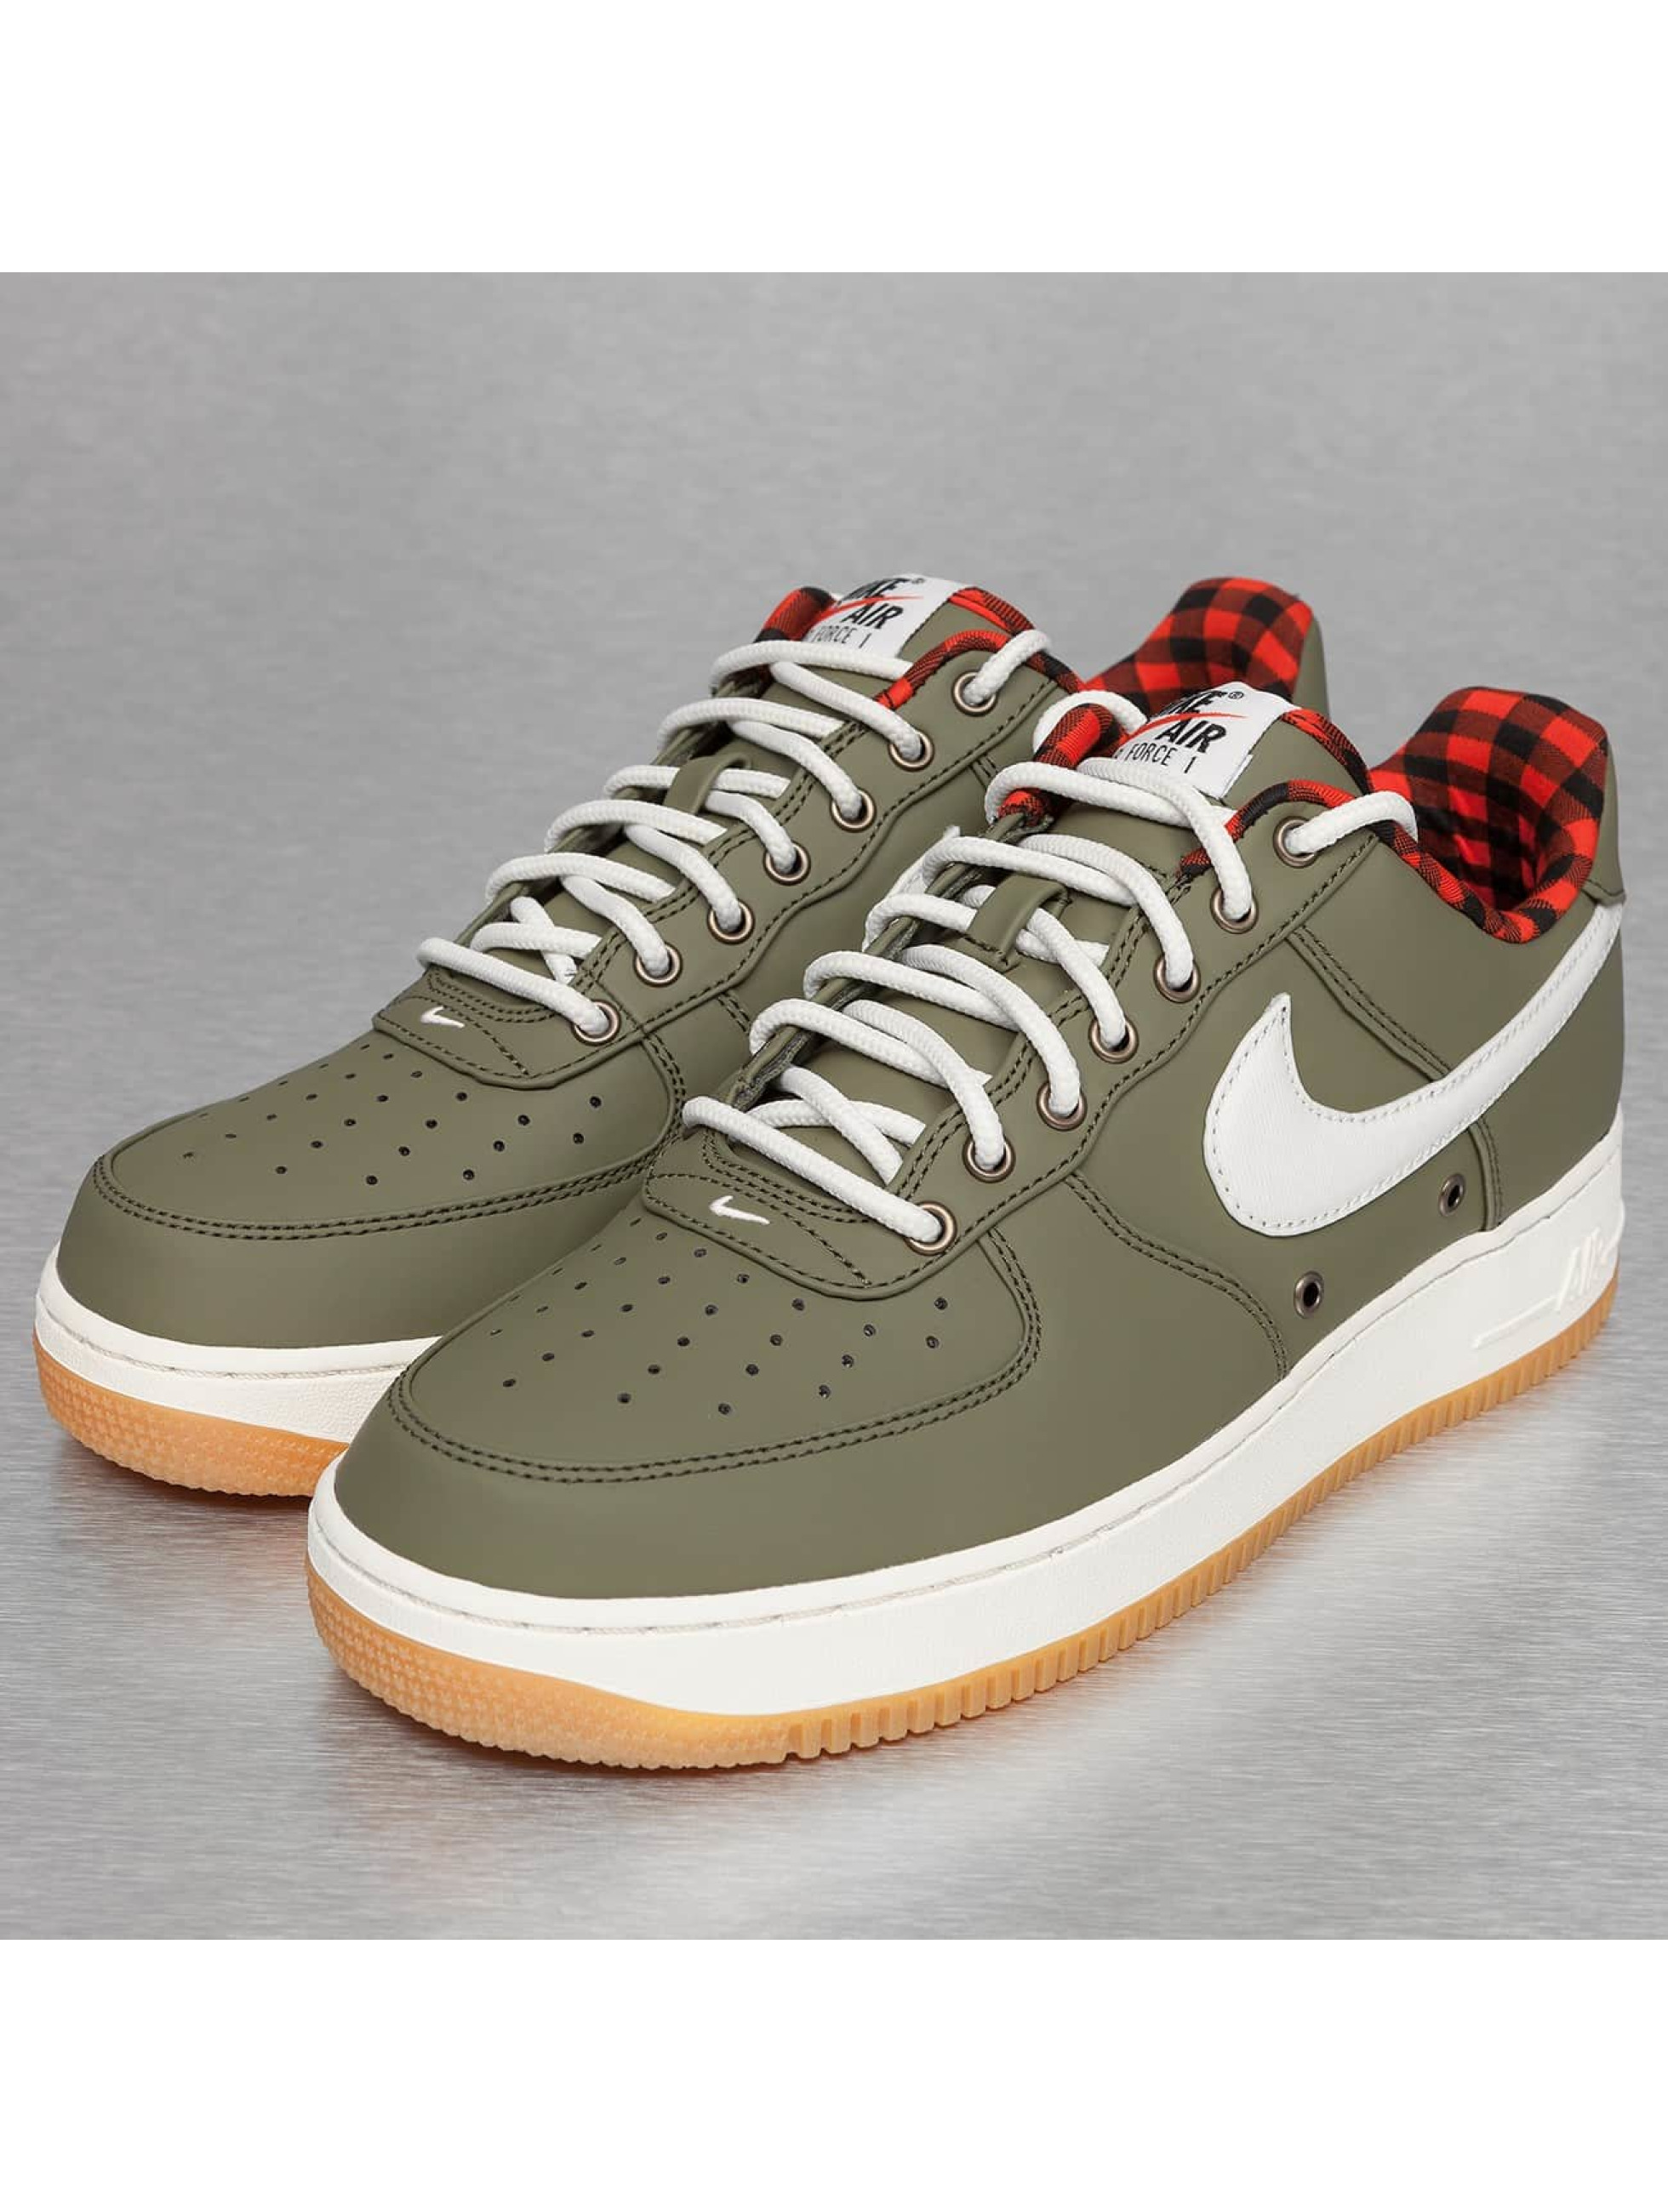 Sneaker Air Force 1 '07 LV8 in olive